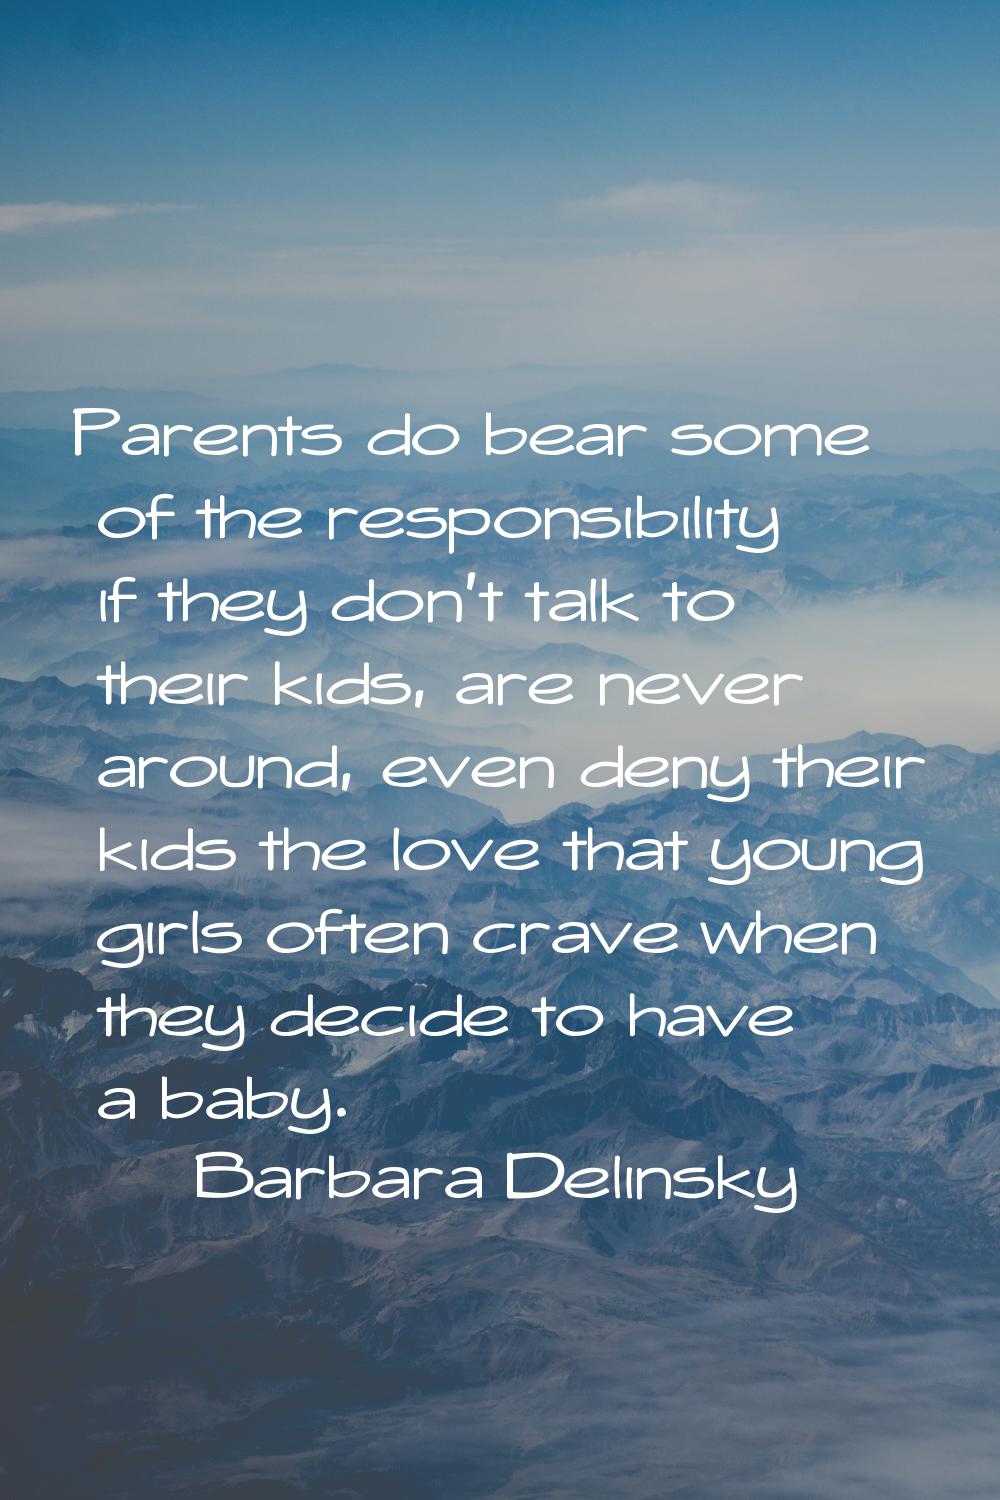 Parents do bear some of the responsibility if they don't talk to their kids, are never around, even